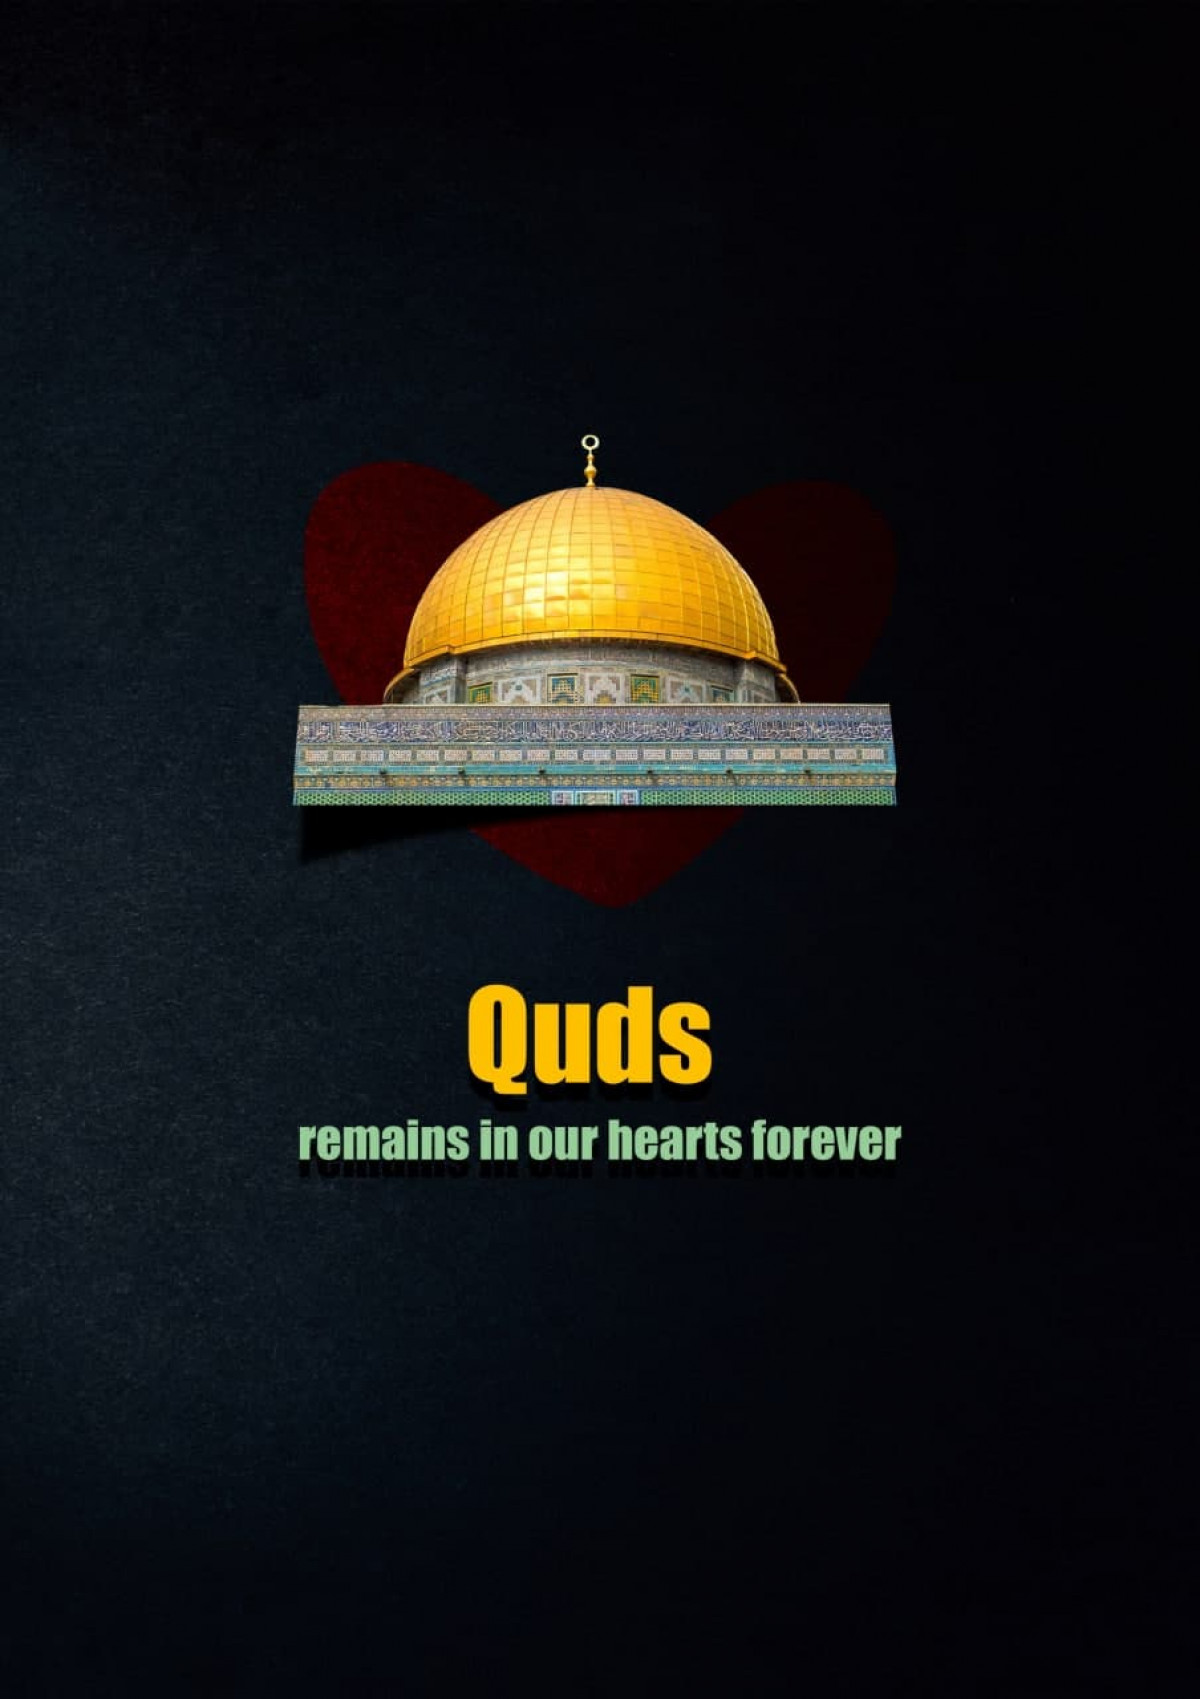 Quds remains in our hearts forever